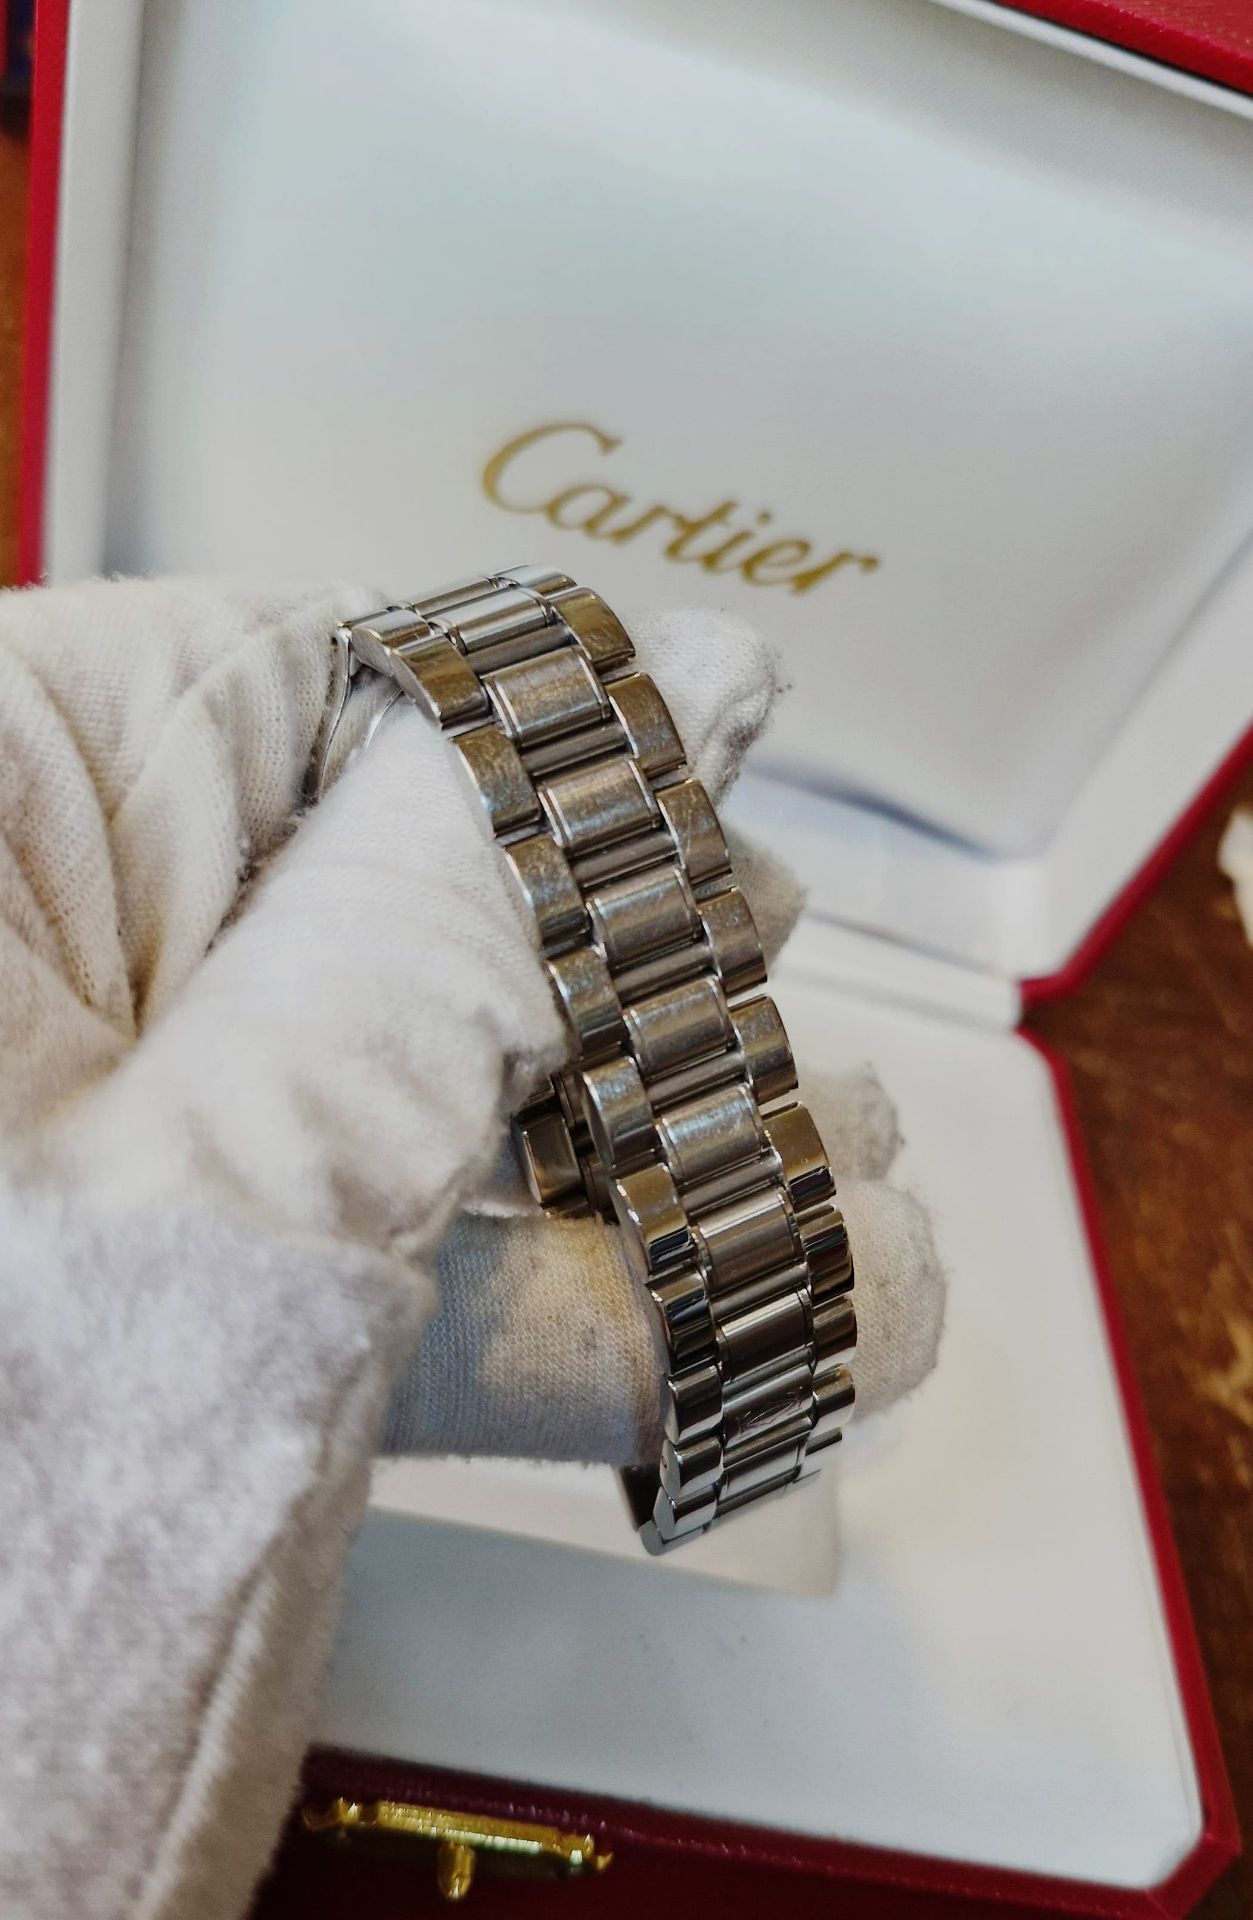 Cartier Ladies Watch Stainless Steel, Box & Papers, NO VAT - Image 2 of 9